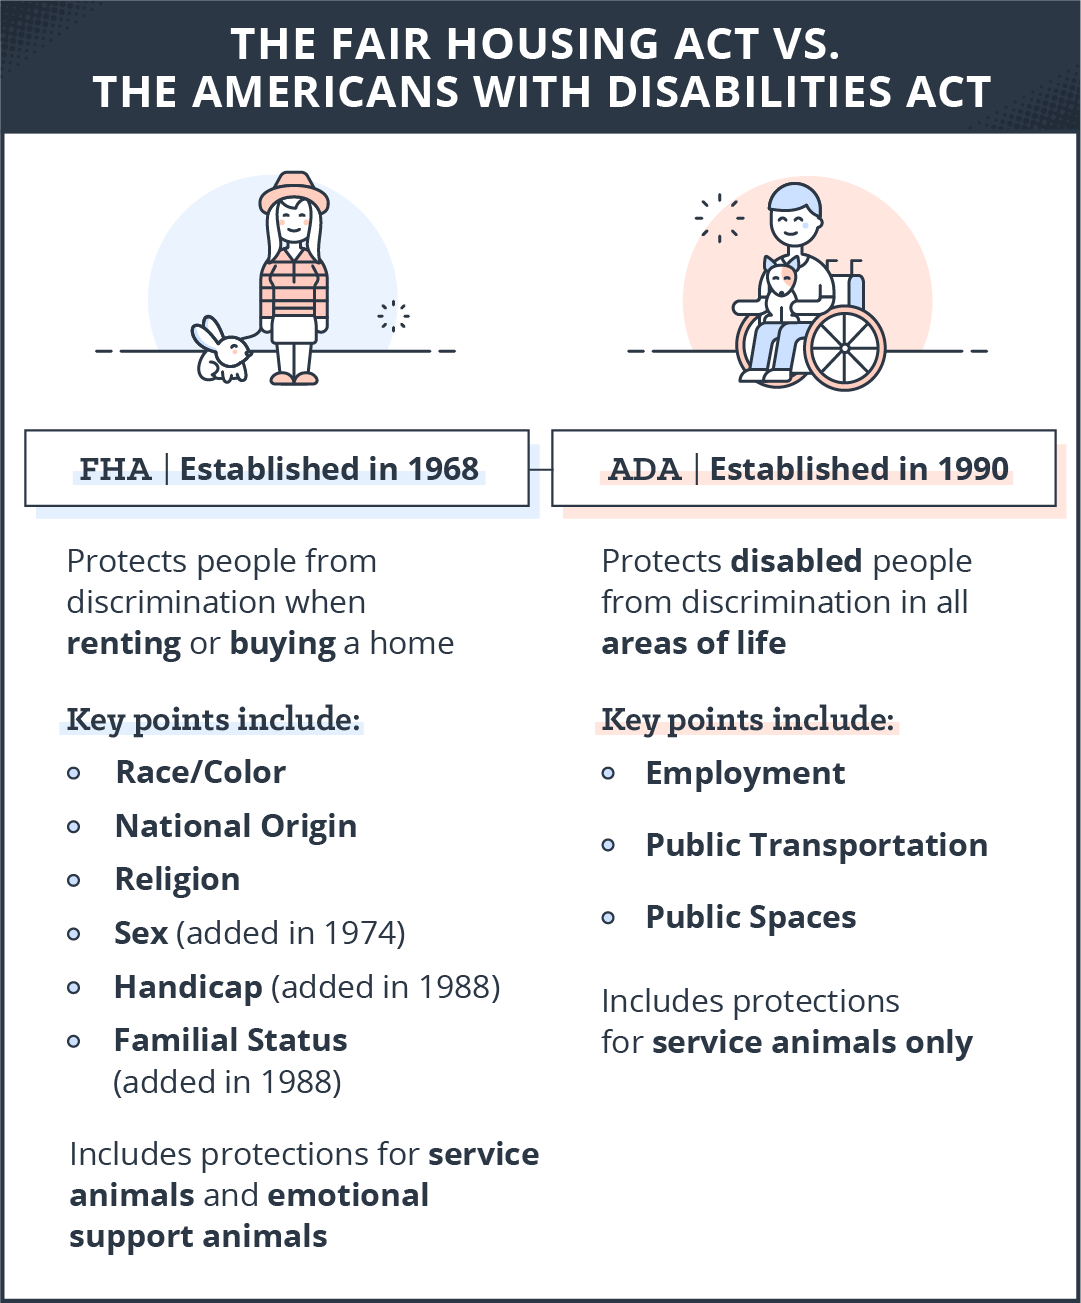 fair-housing-act-vs-americans-with-disabilities-act FHA was established in 1968 and protects people from discrimination when renting or buying a home. The FHA includes protections for service animals and emotional support animals.The ADA was established in 1990 and protects disabled people from discrimination in all areas of life. The ADA includes protections for service animals only.